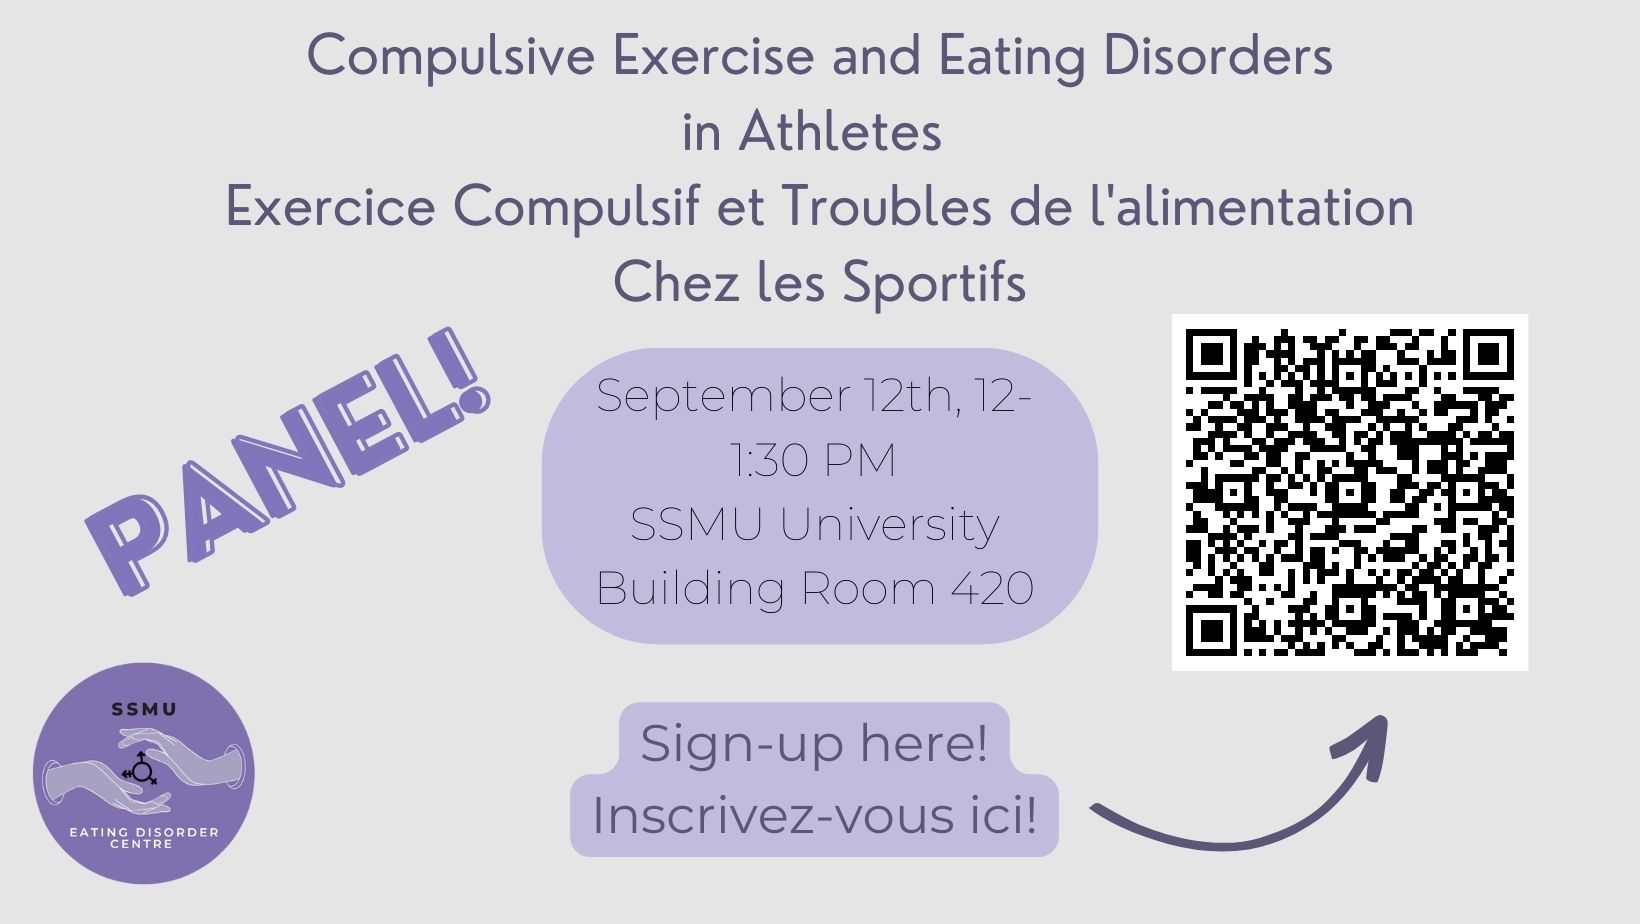 Compulsive Exercise and Eating Disorders in Athletes